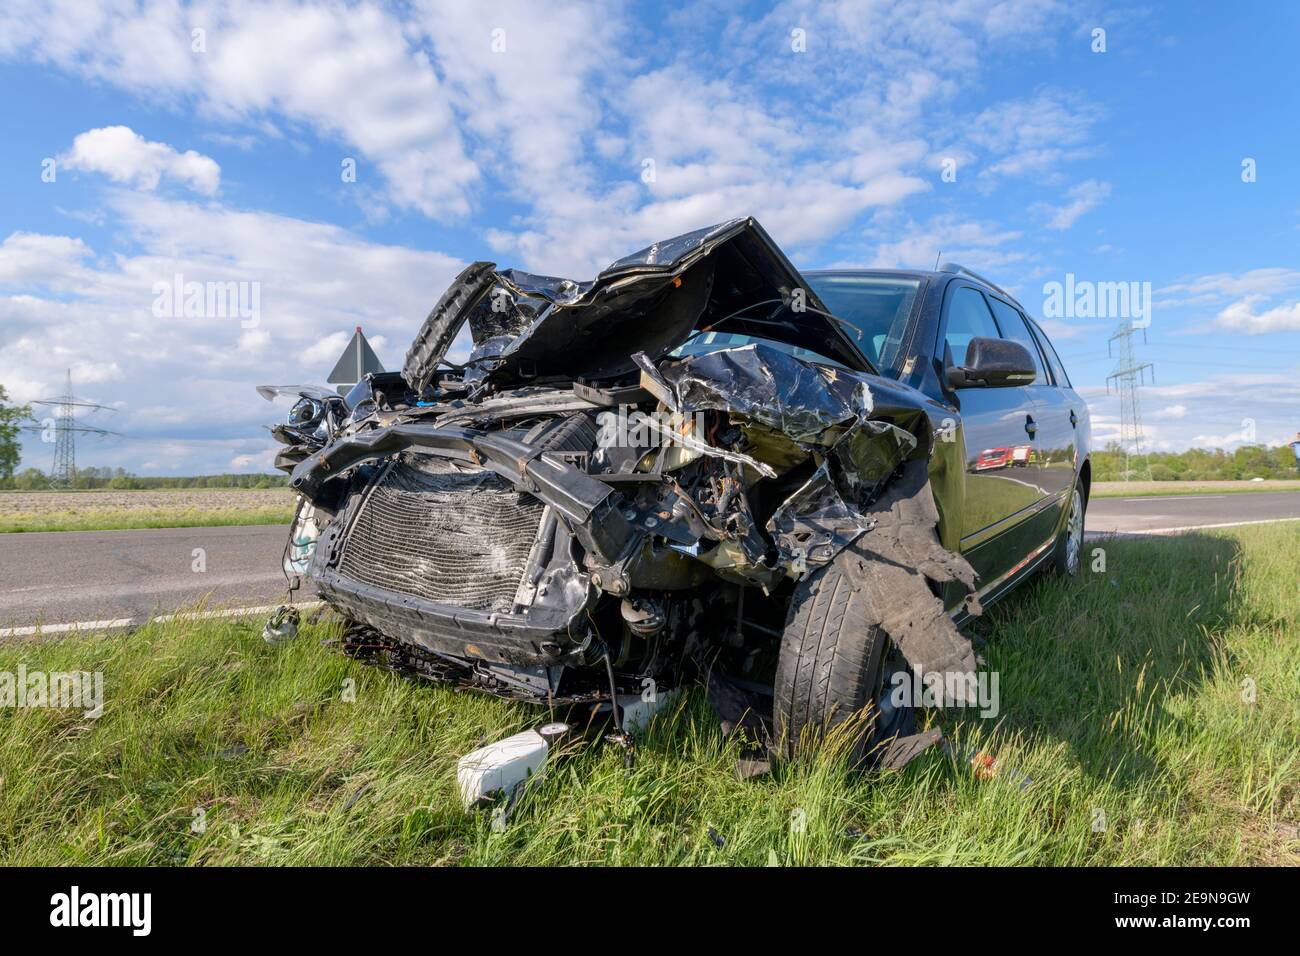 An accident car destroyed in the front area Stock Photo